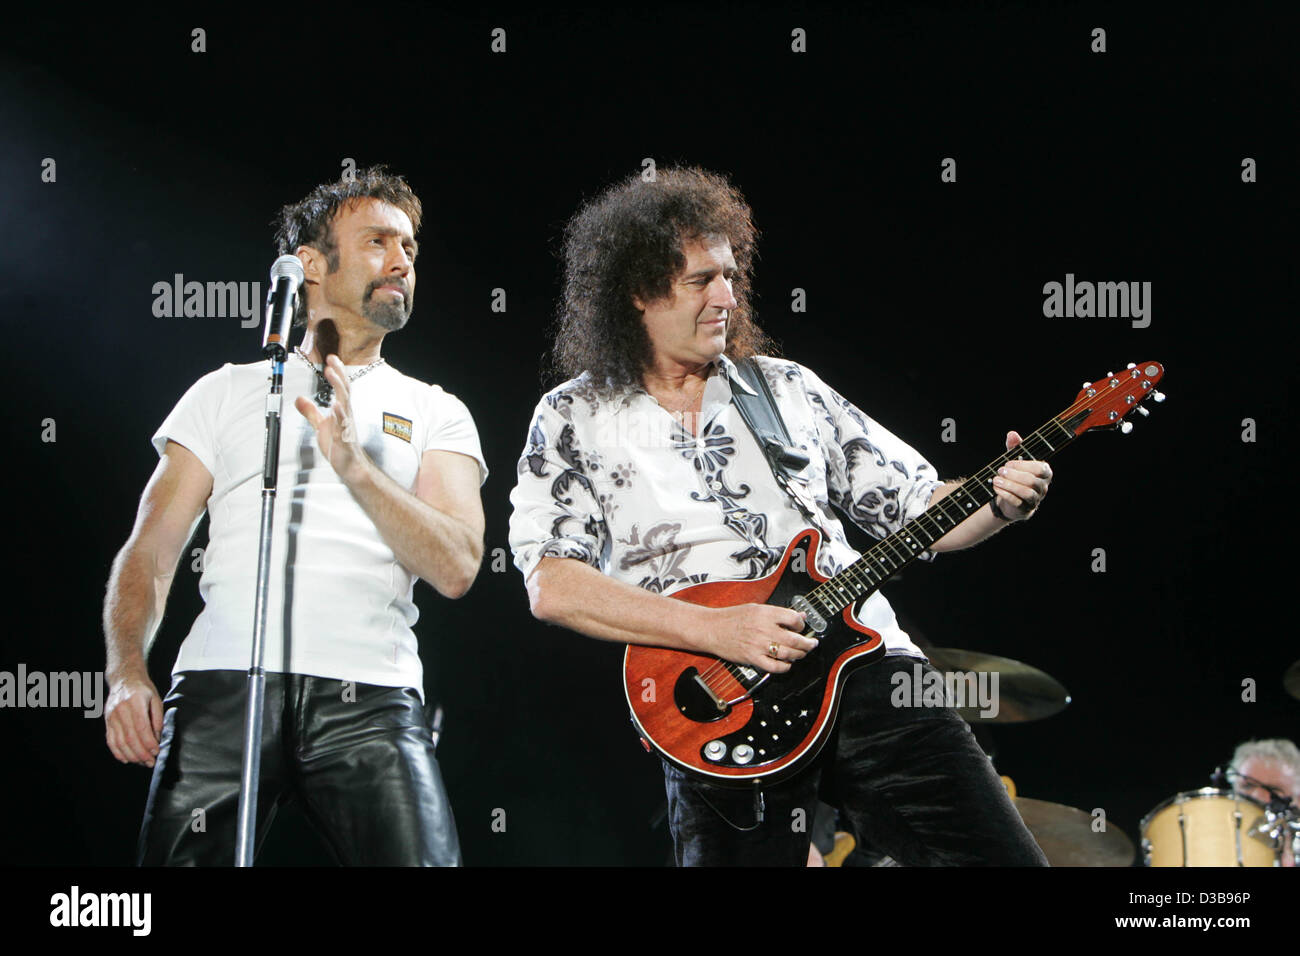 (dpa) - Brian May (R), member of the British pop band Queen, and singer Paul Rodgers perform at the RheinEnergieStadion in Cologne, Germany, 06 July 2005. Queen performed an additional concert in front of 30,000 concert goers. Stock Photo